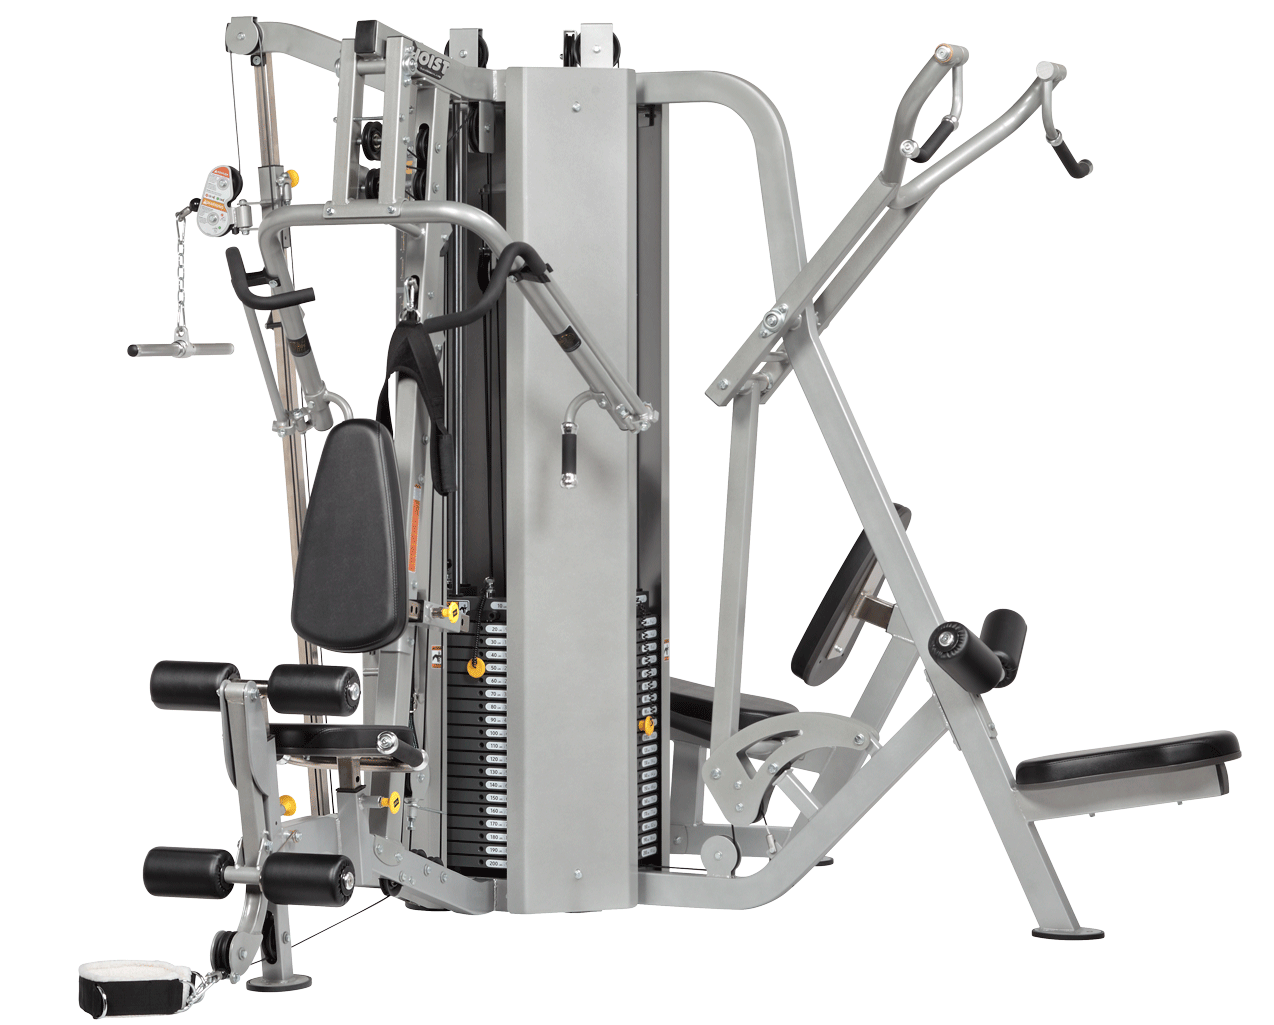  Body-Solid Powerline (P2LPX) Multi-Station Single Weight Stack Home  Gym Machine, Arm & Leg Strength Training Functional Exercise Workout  Station for Weight Lifting and Bodybuilding with Leg Press : Exercise  Equipment 